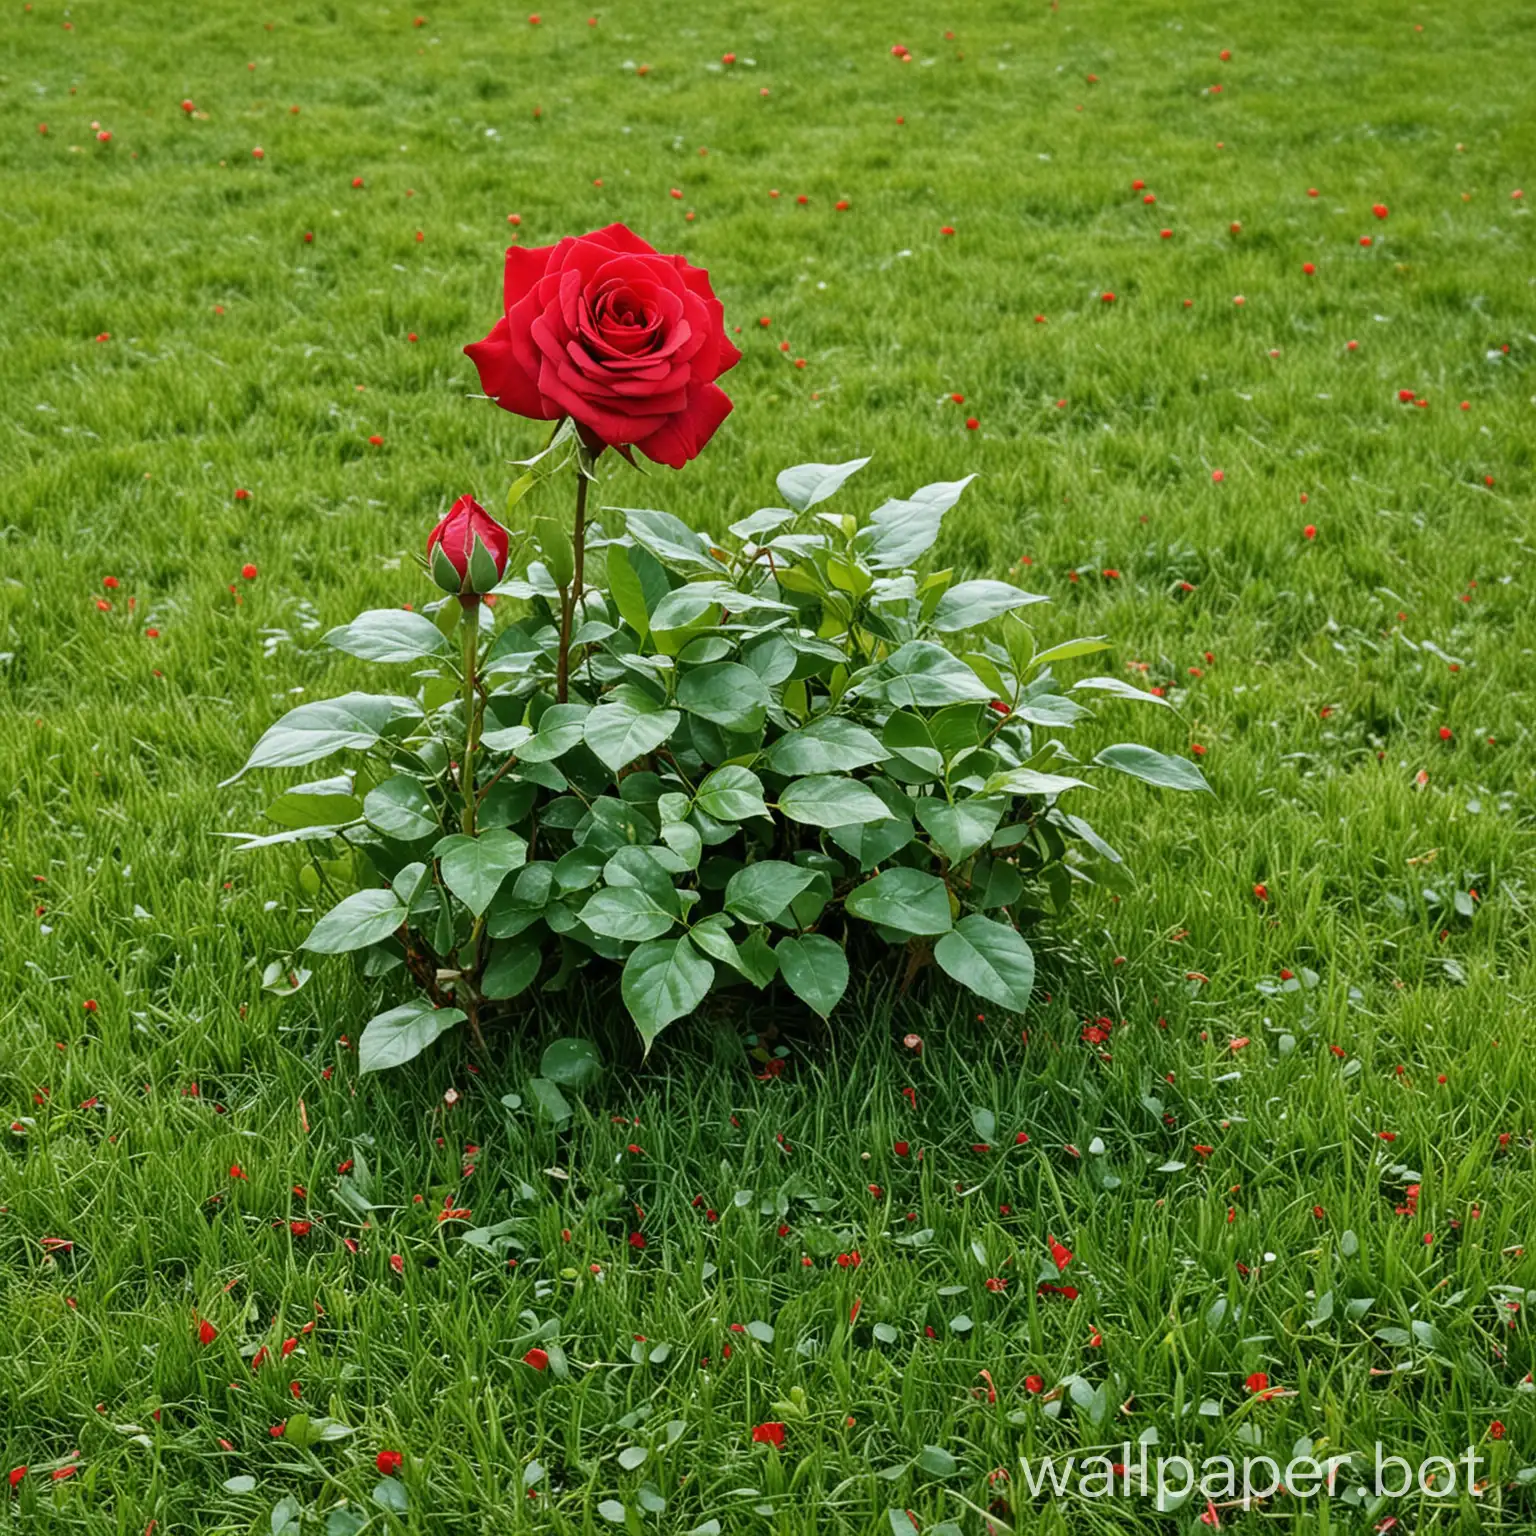 green grass and red rose plant in it